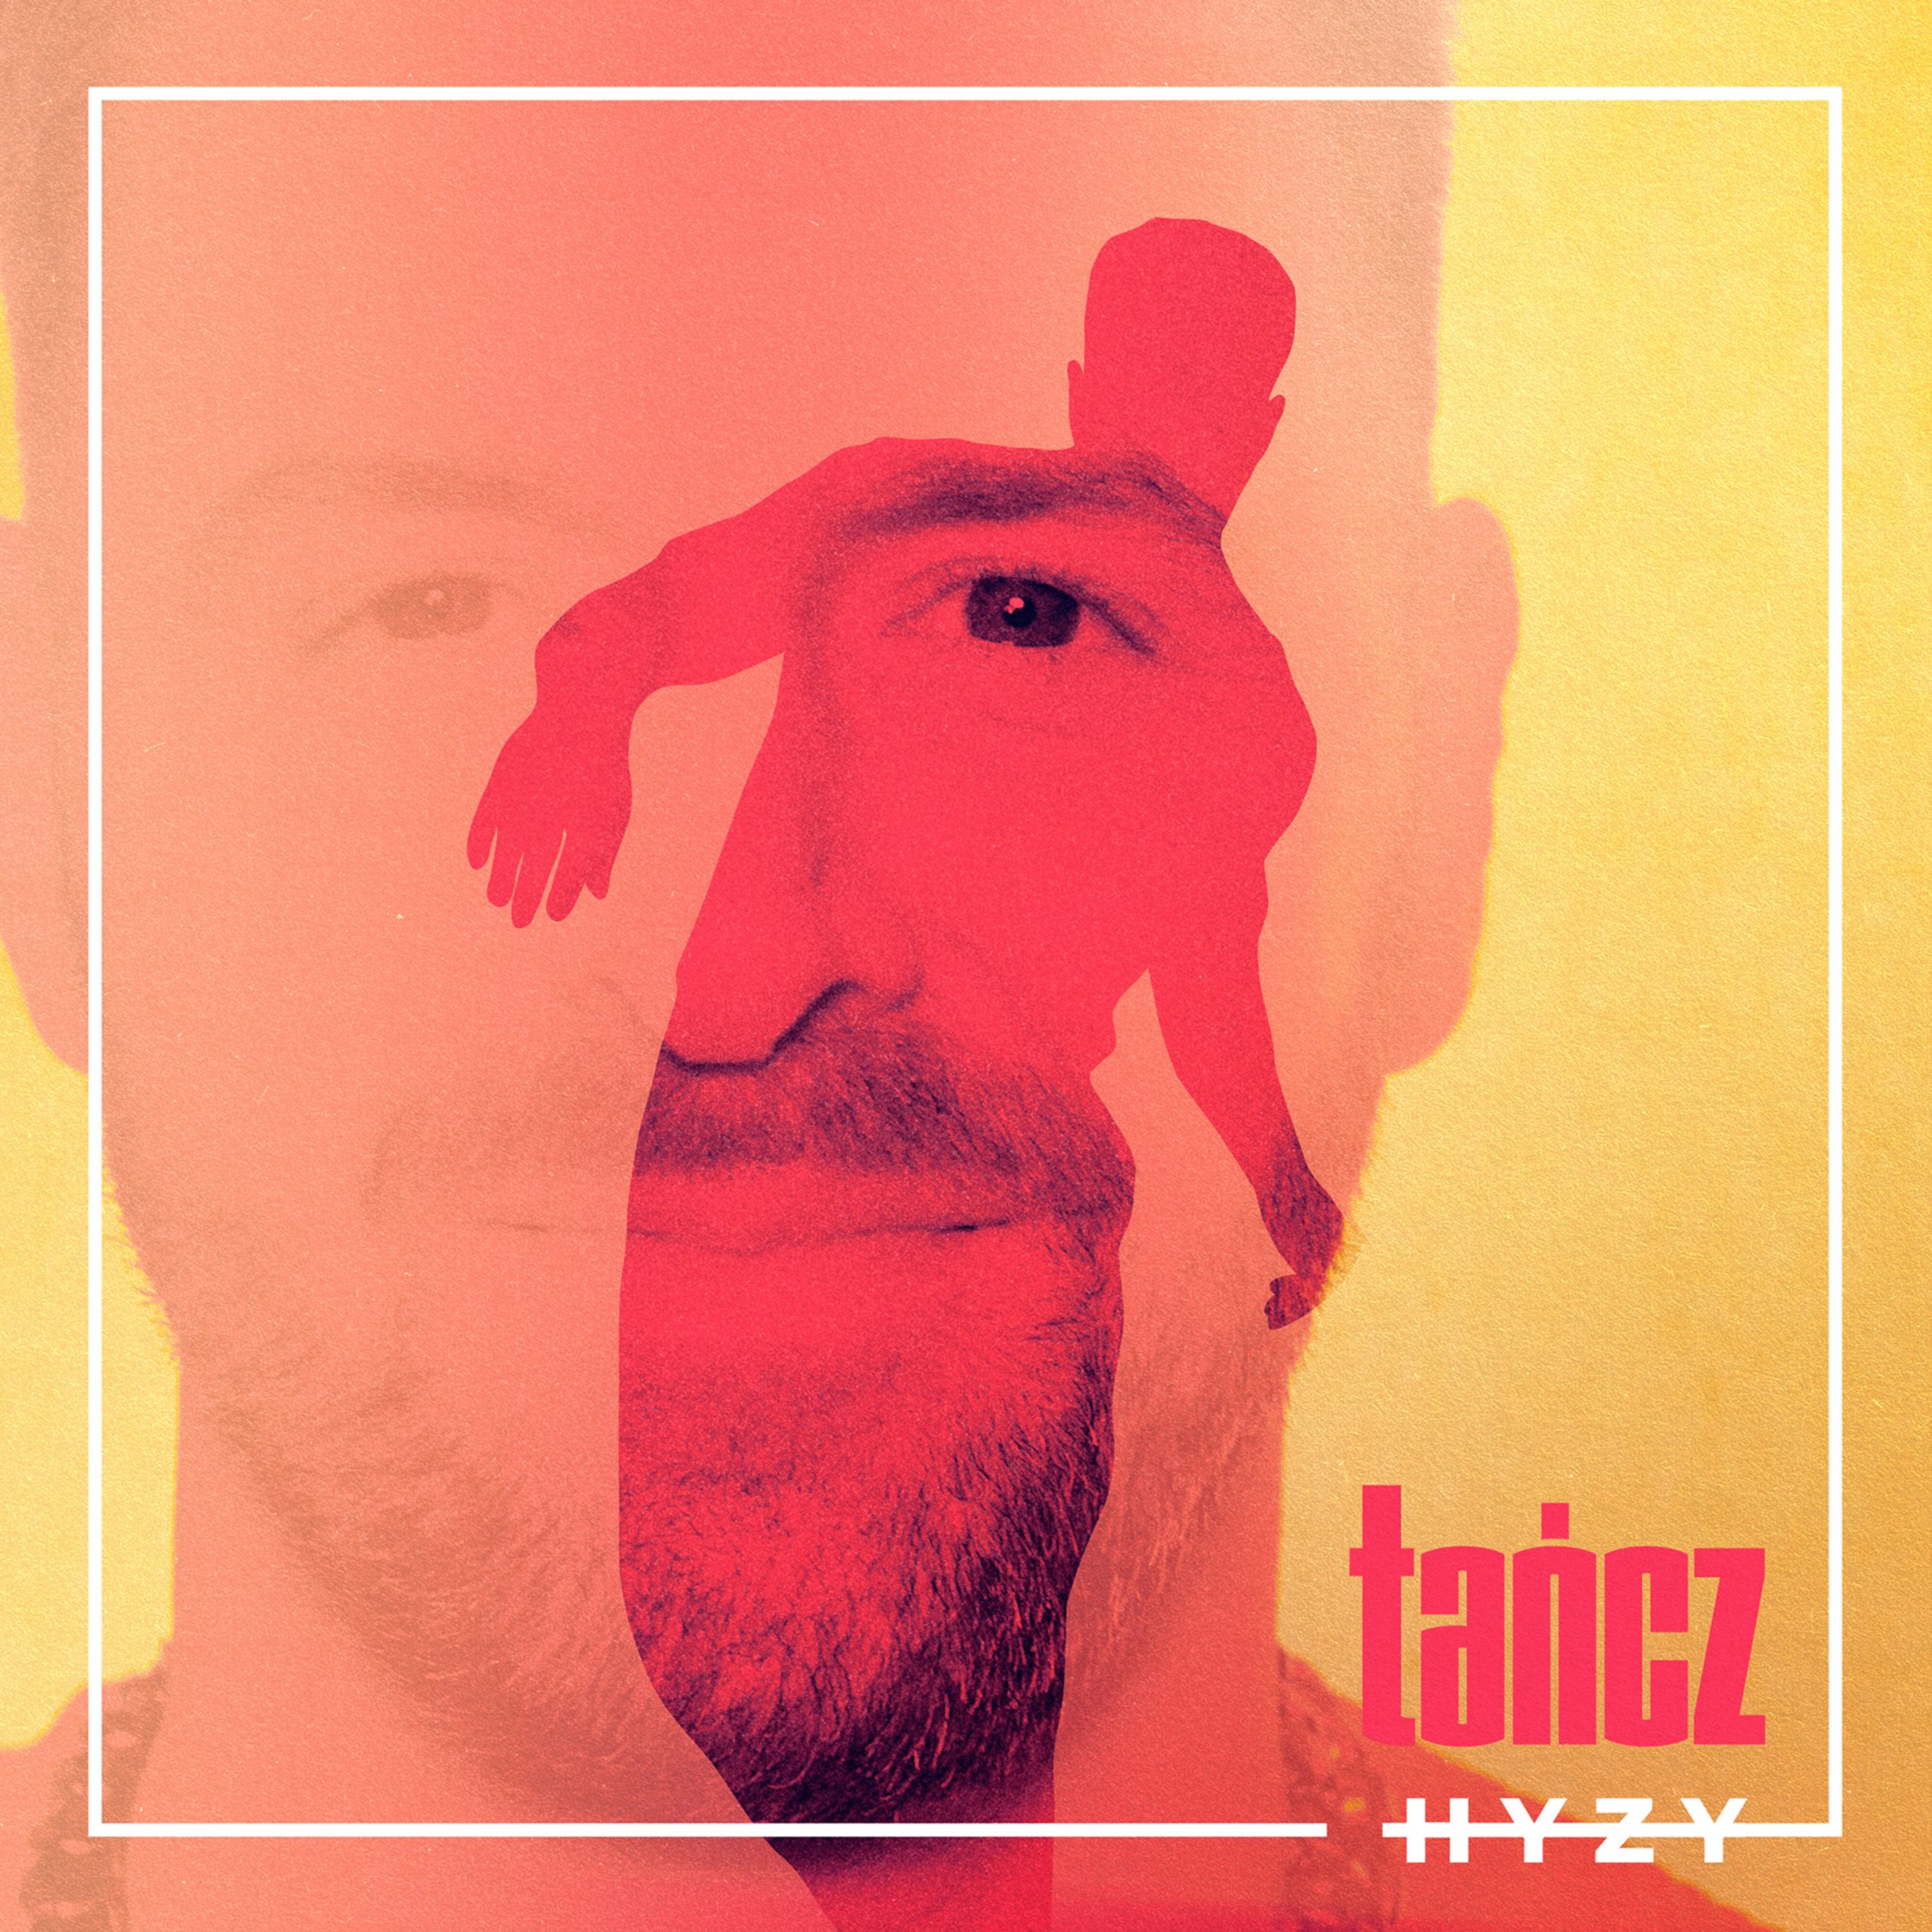 You are currently viewing SuperNova: Grzegorz Hyzy – Tancz (01.08)